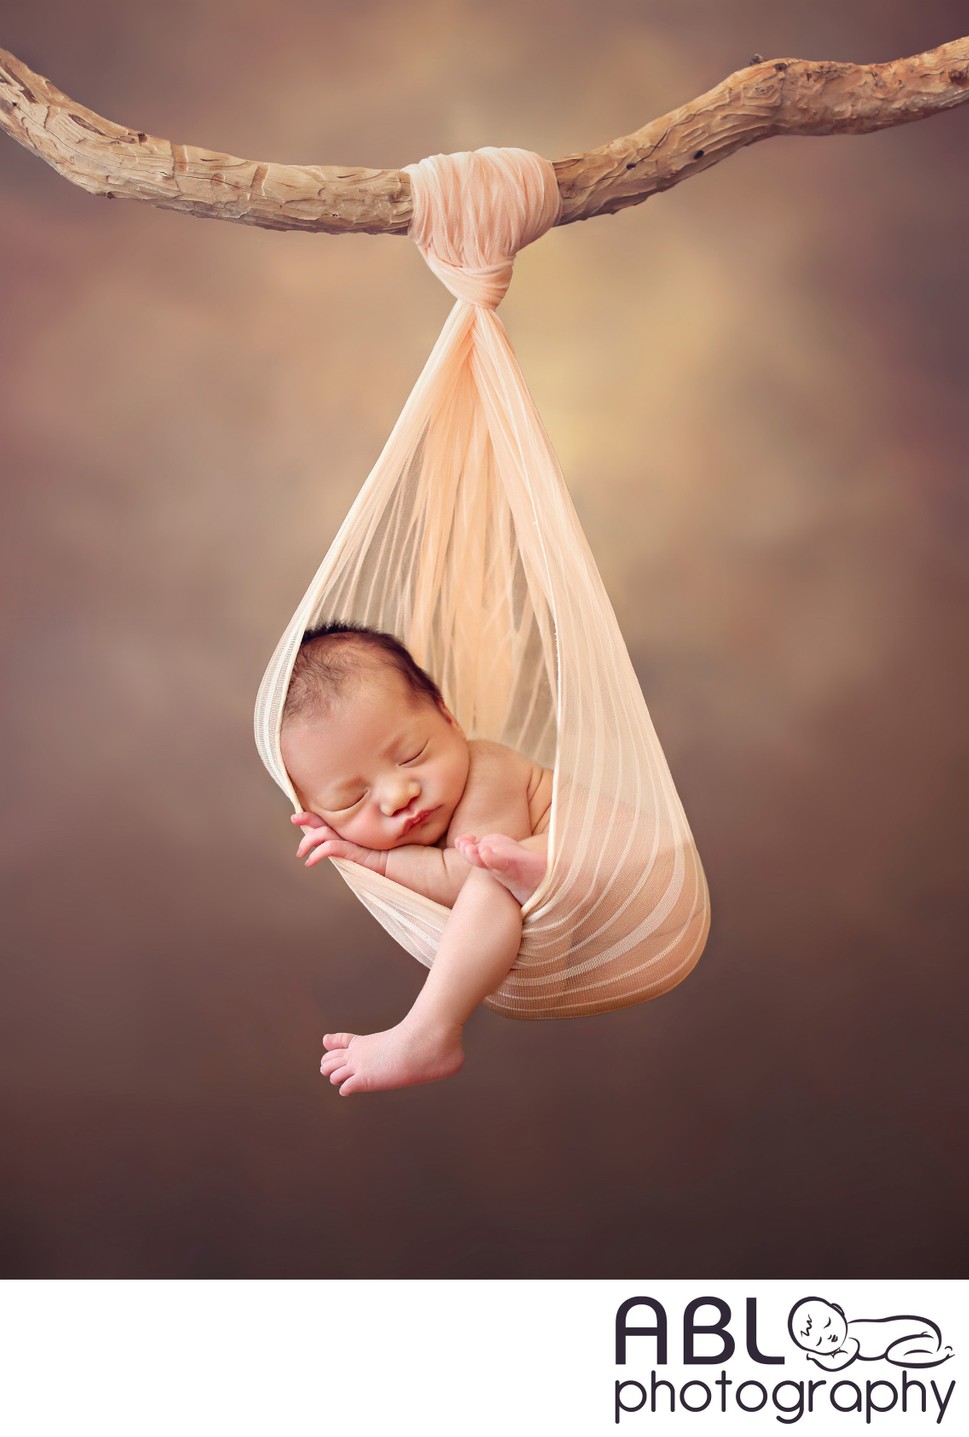 Newborn Photography San Diego. Baby hanging off a tree branch